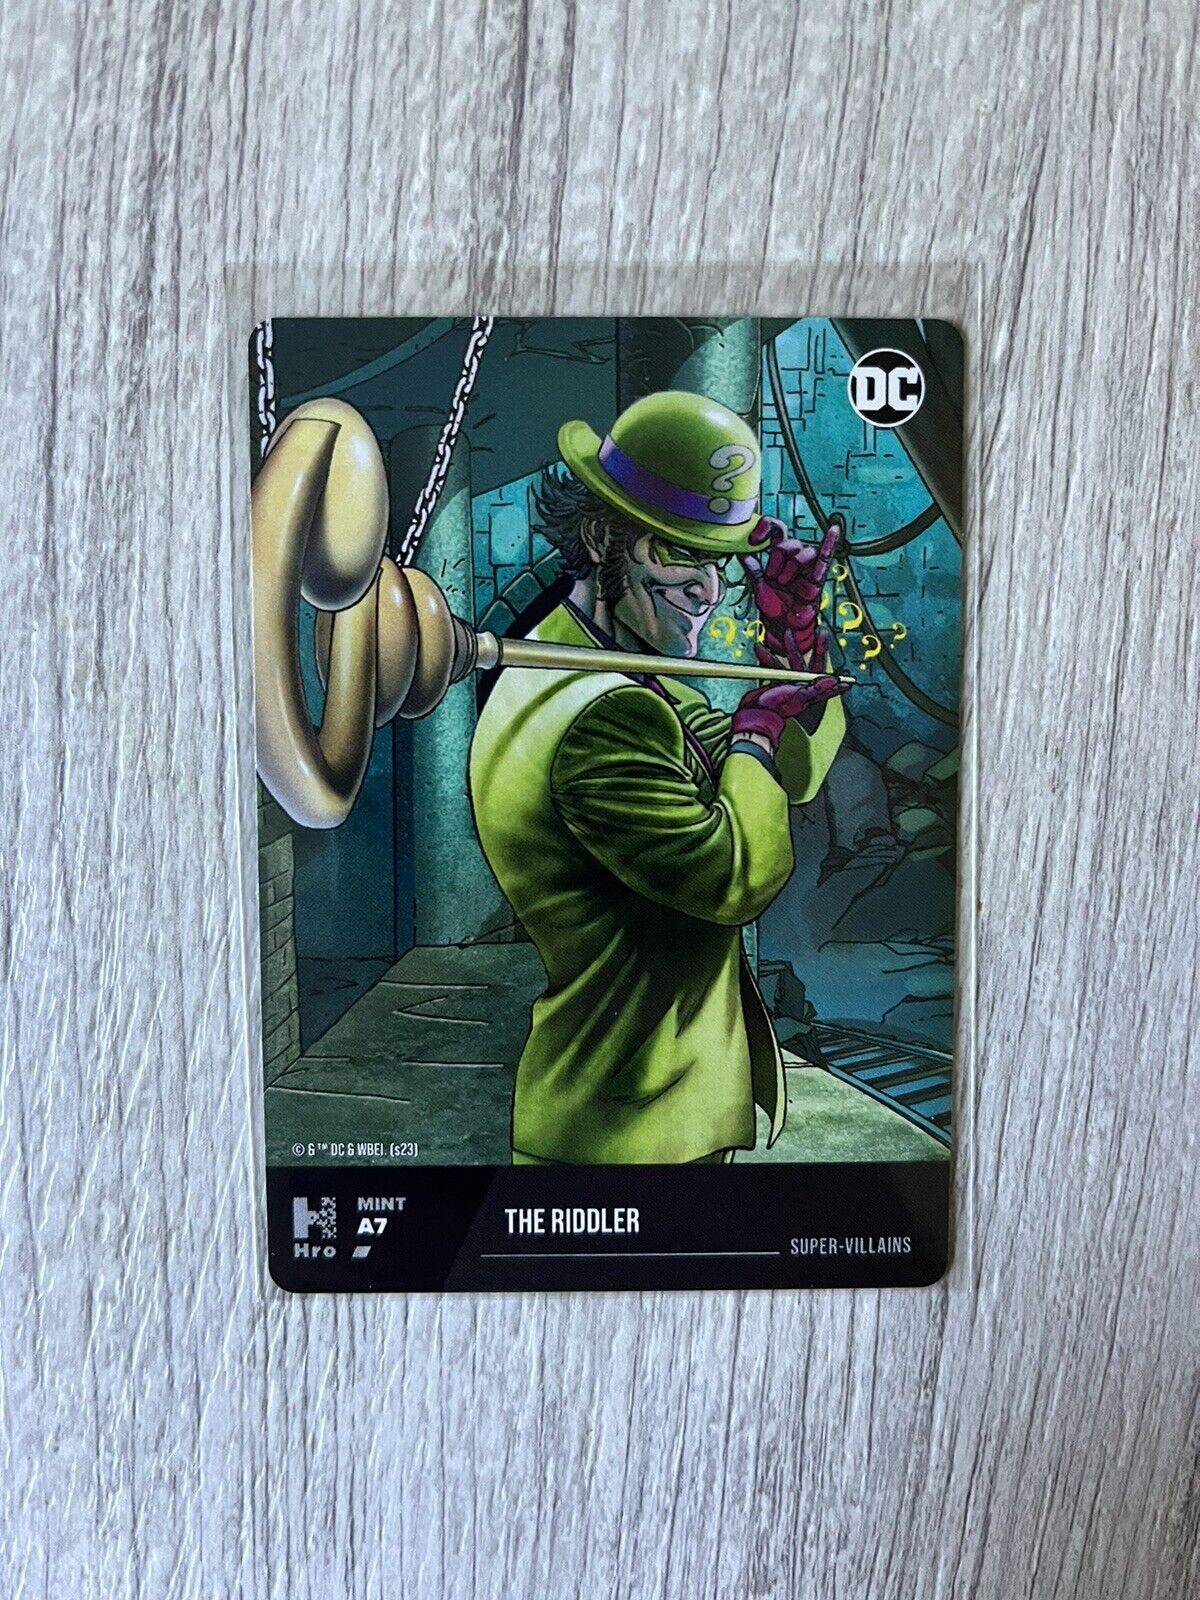 RARE HRO Chapter 3 The Riddler # A7 Low Mint Single Digit Mint PHYSICAL ONLY